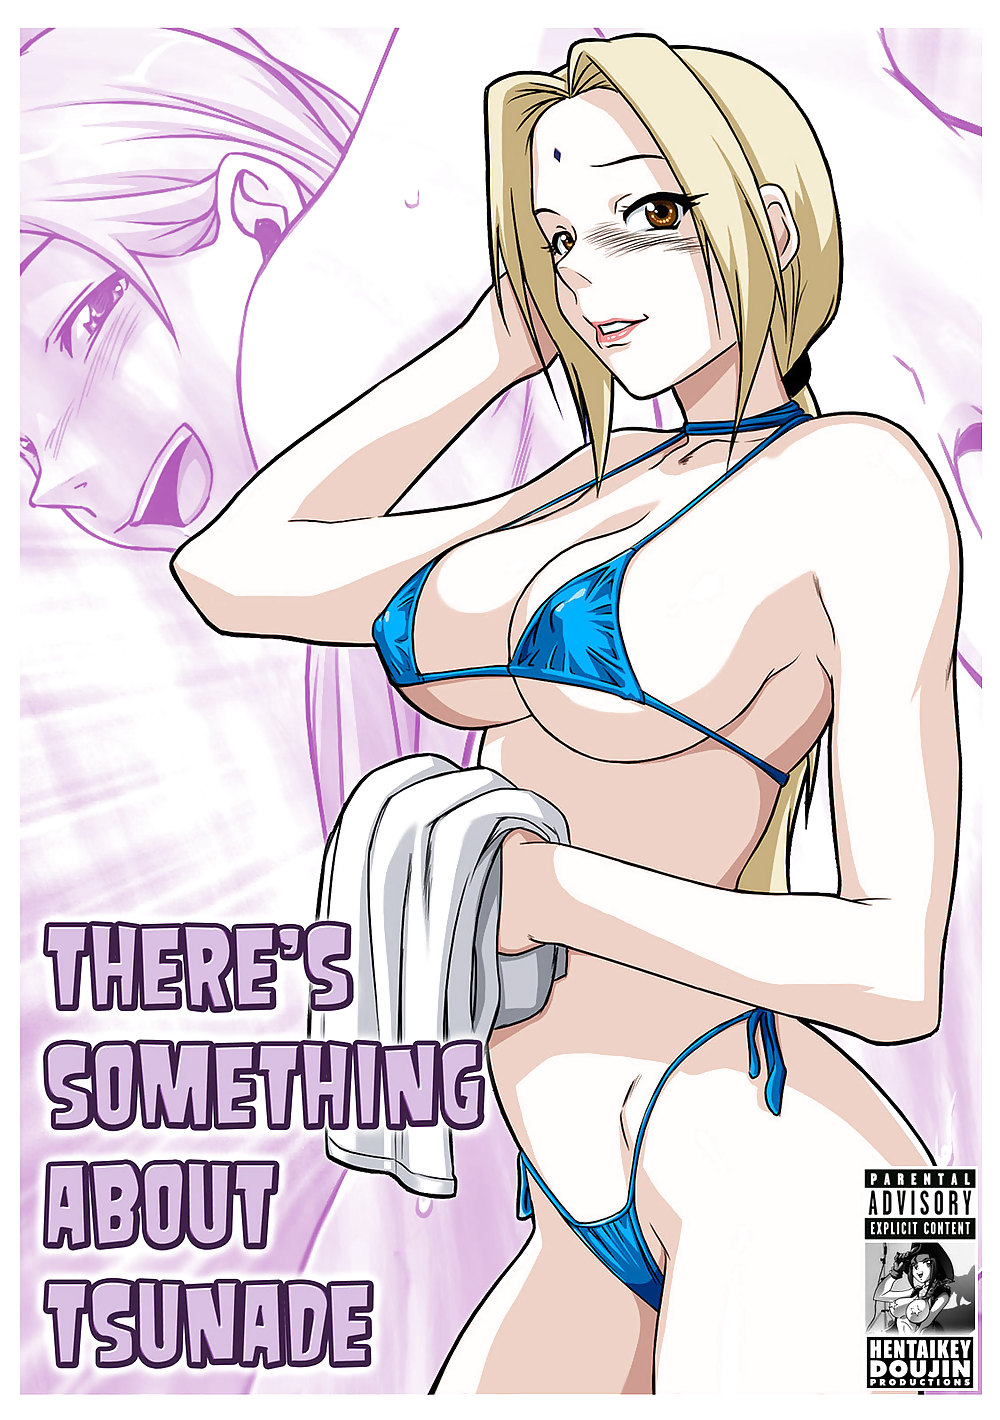 There's something about Tsunade #13746329